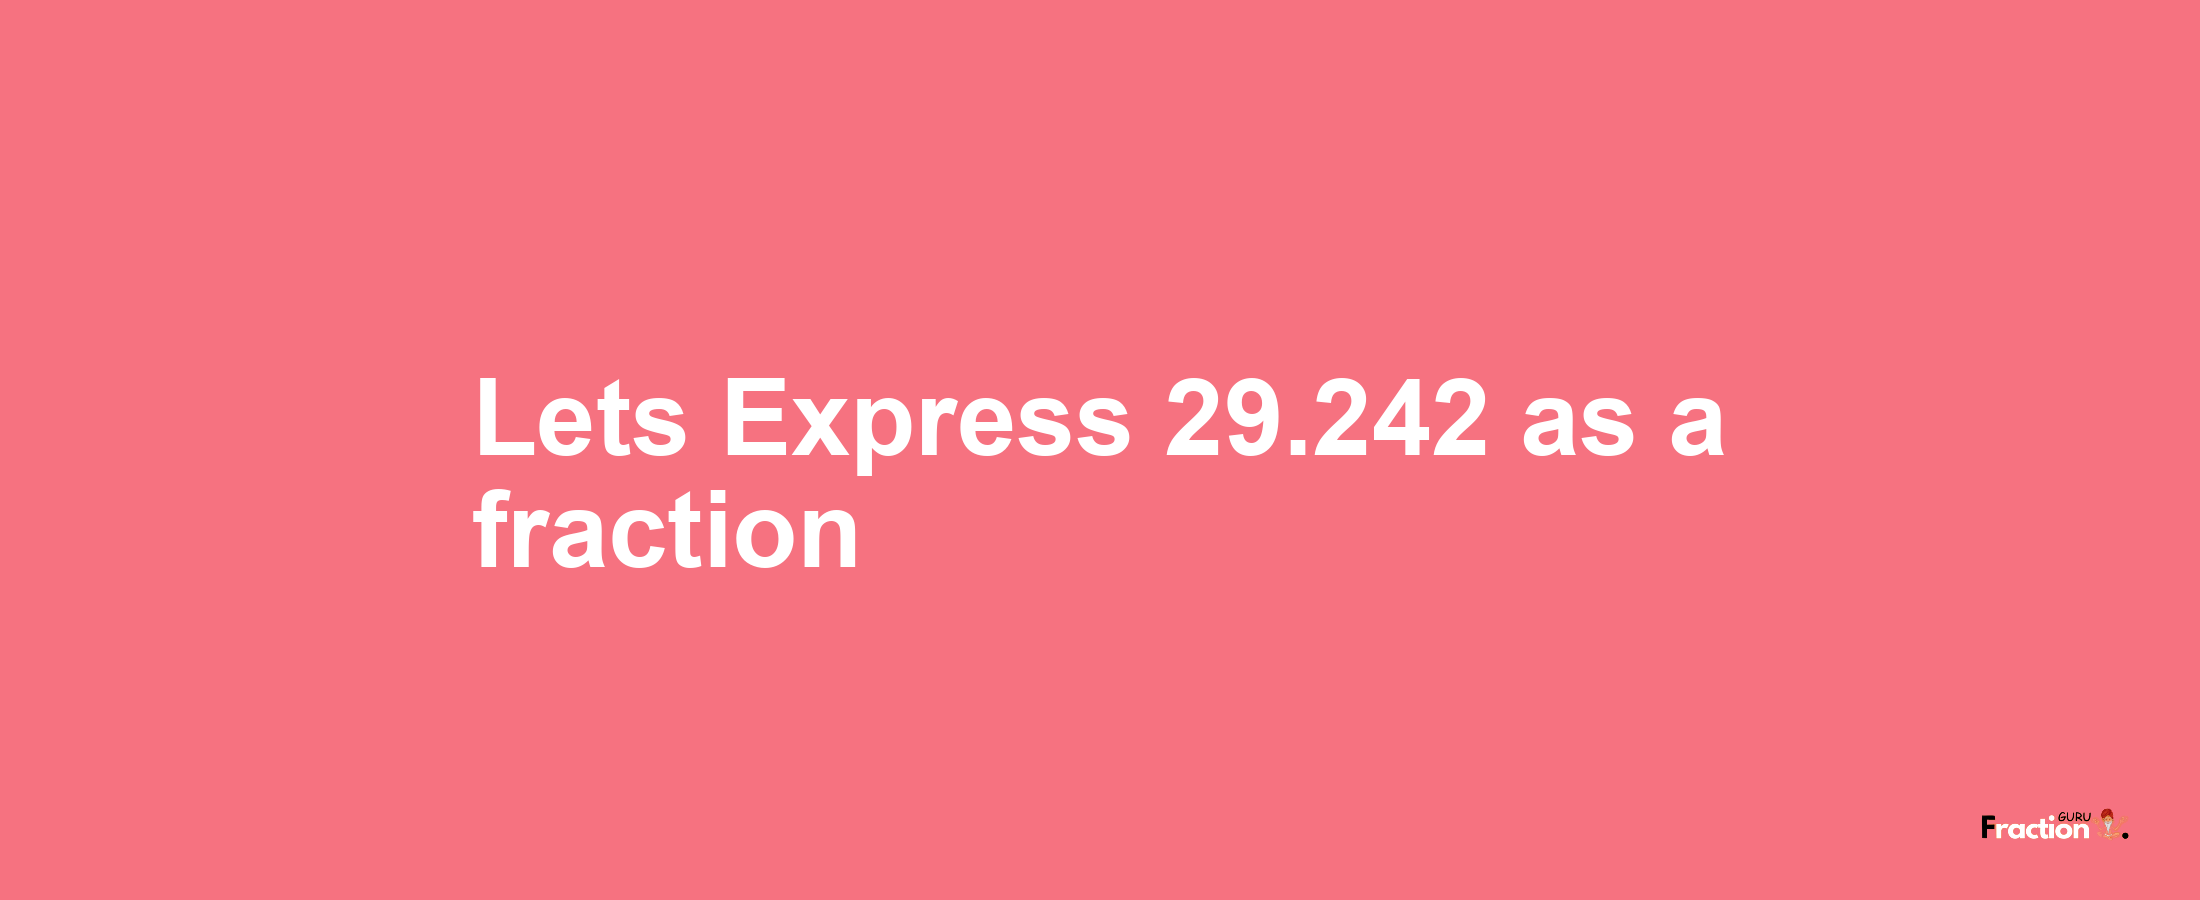 Lets Express 29.242 as afraction